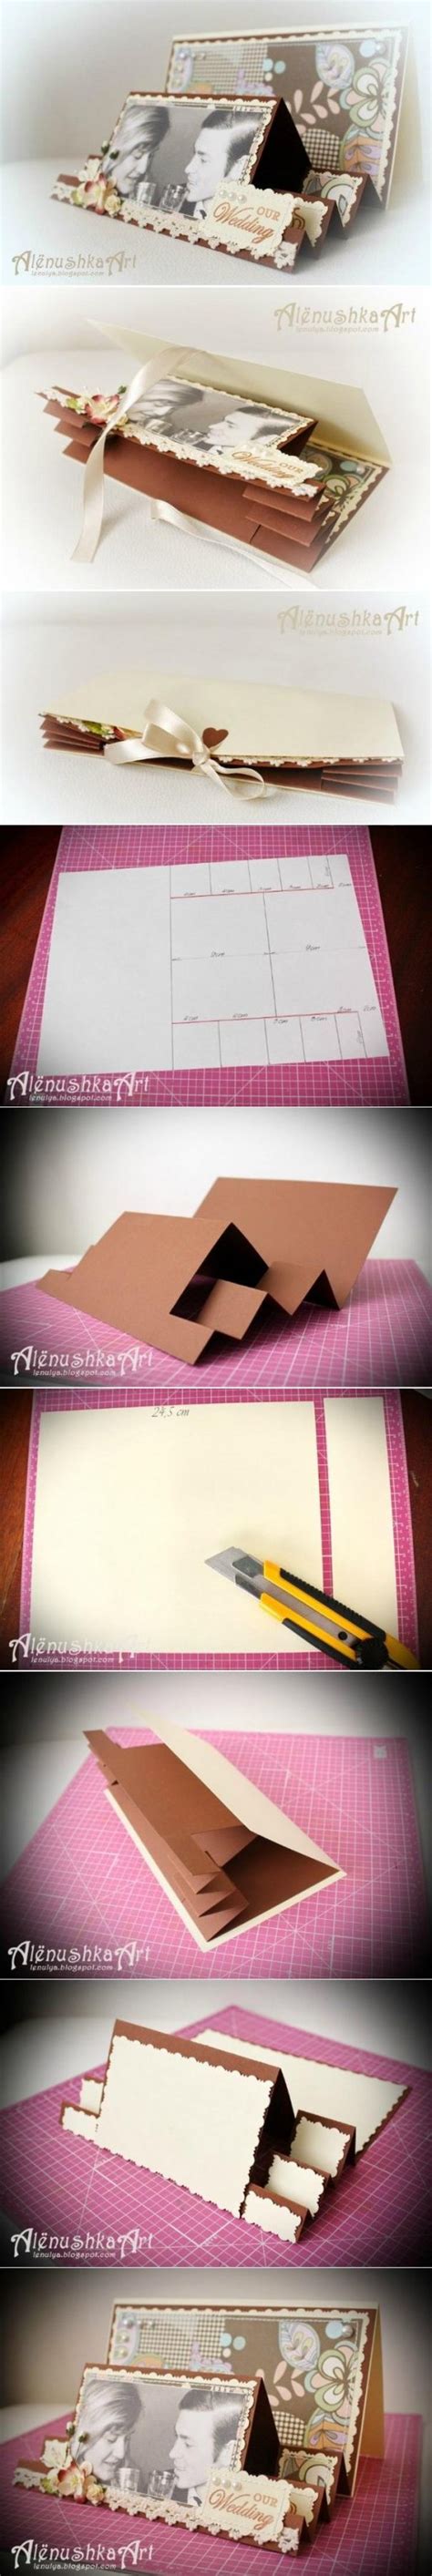 Fancy fold cards folded cards bridge card homemade birthday cards diy shutters images vintage kitchen benches white plates wood patterns. How to make 3D Wedding Card step by step DIY tutorial instructions | How To Instructions